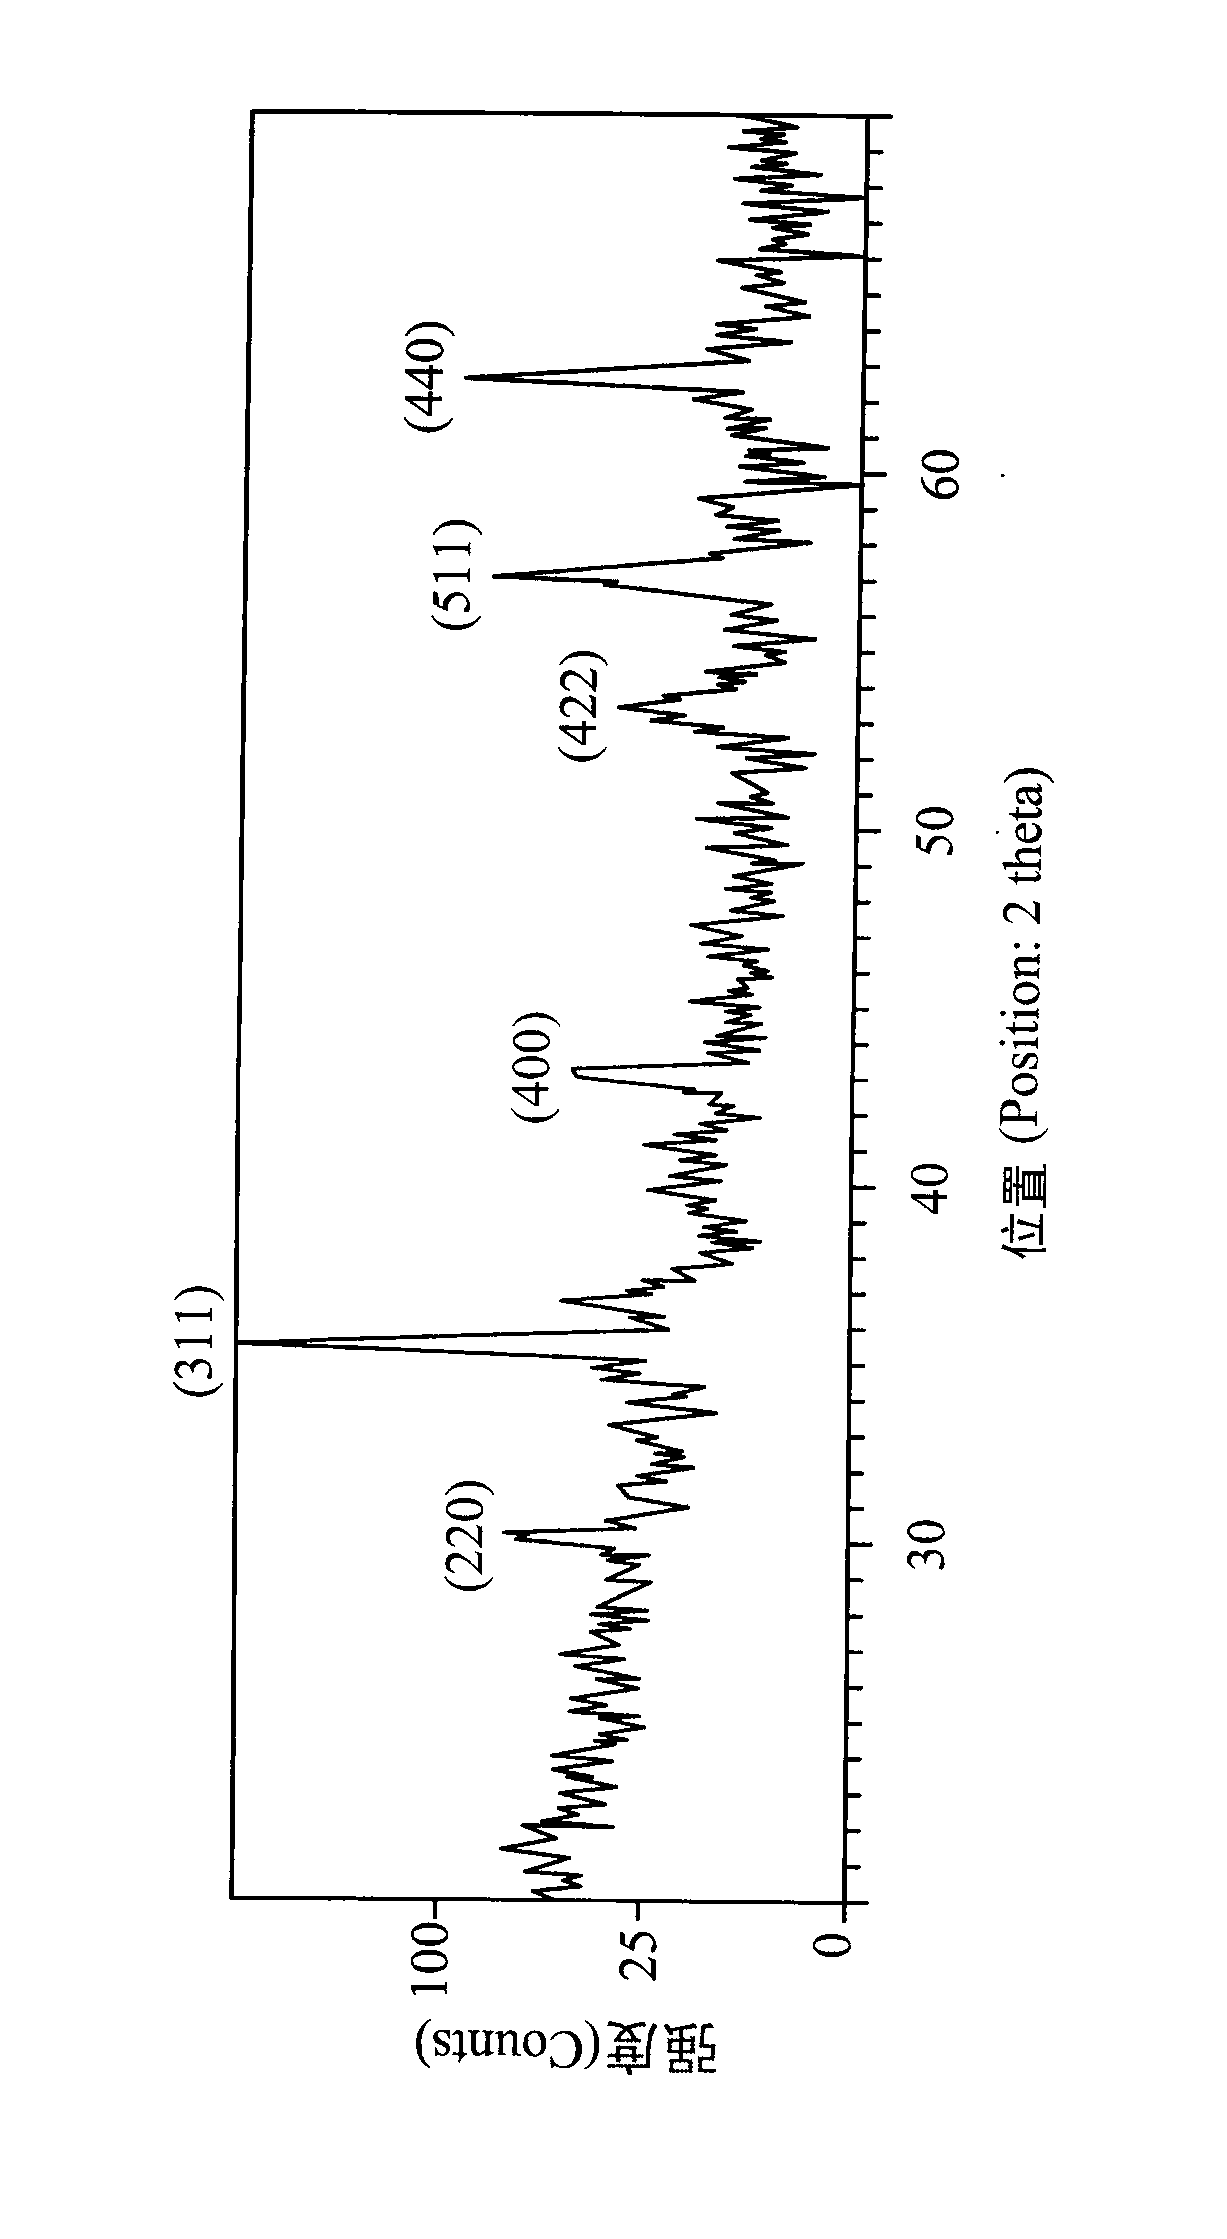 Composite material with conductive and ferromagnetic properties and hybrid slurry